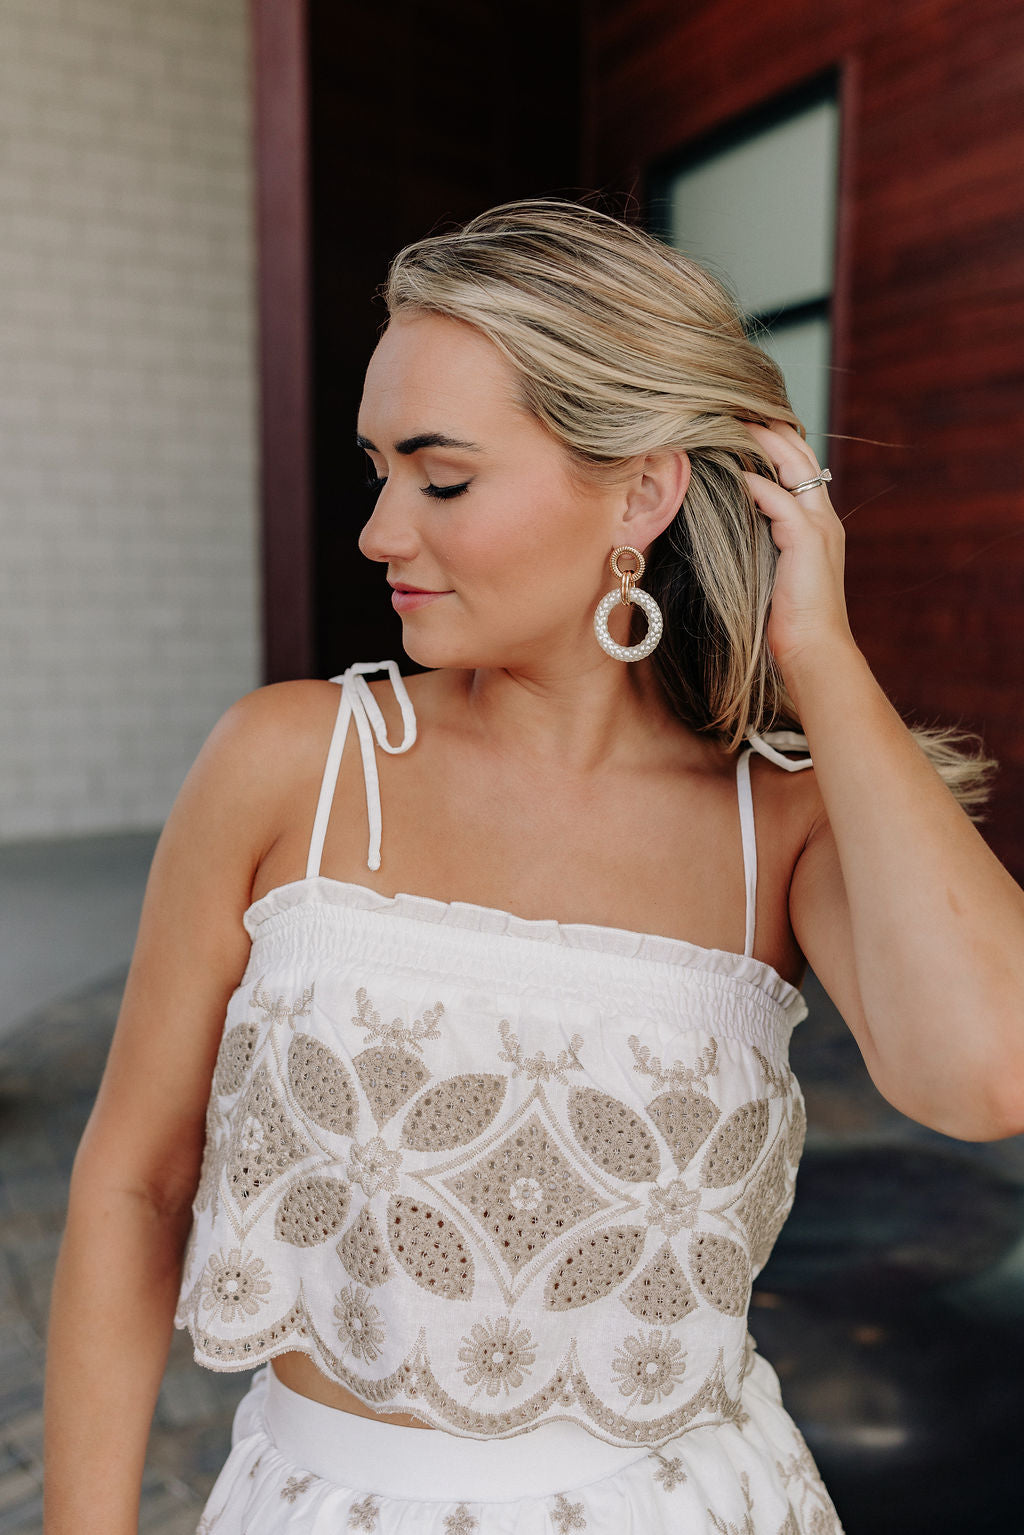 close up view of female model wearing the Alexandra White & Taupe Eyelet Tank which features White and Taupe Fabric, Eyelet Pattern, Scallop Hem, Ruffle Details, Square Neckline, White Lining and Tie Straps